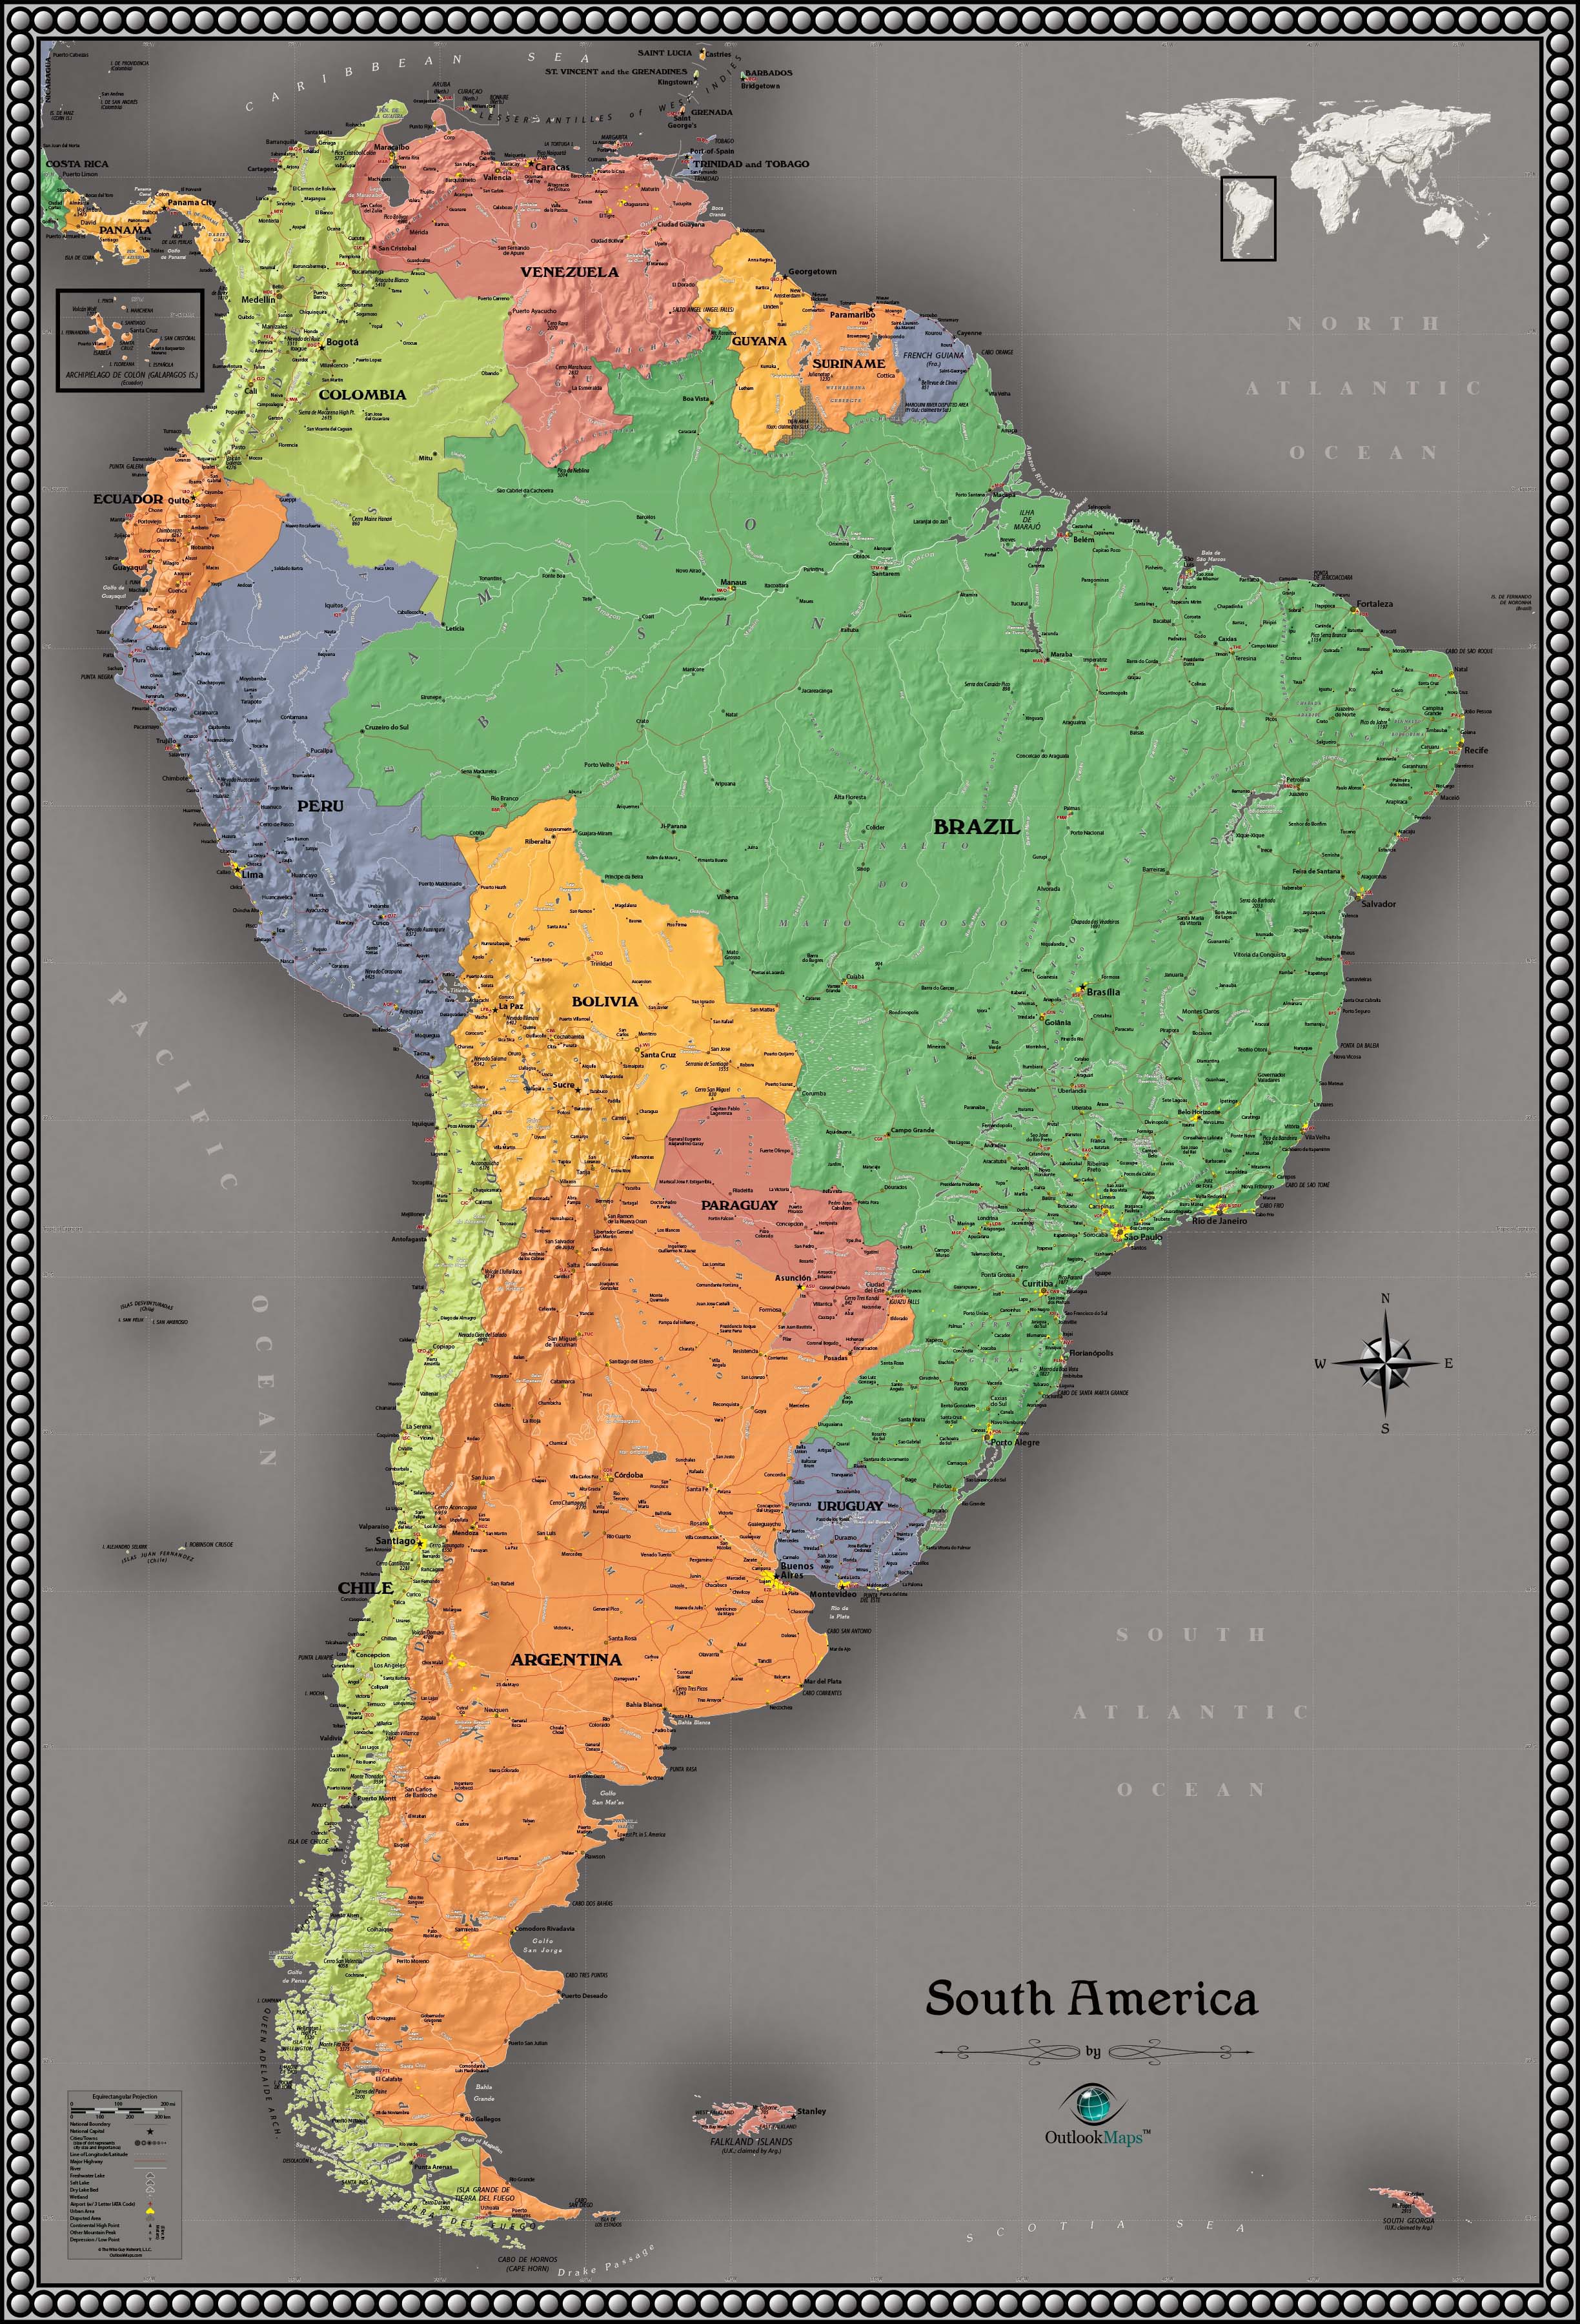 South America Contemporary Wall Map by Outlook Maps - MapSales.com